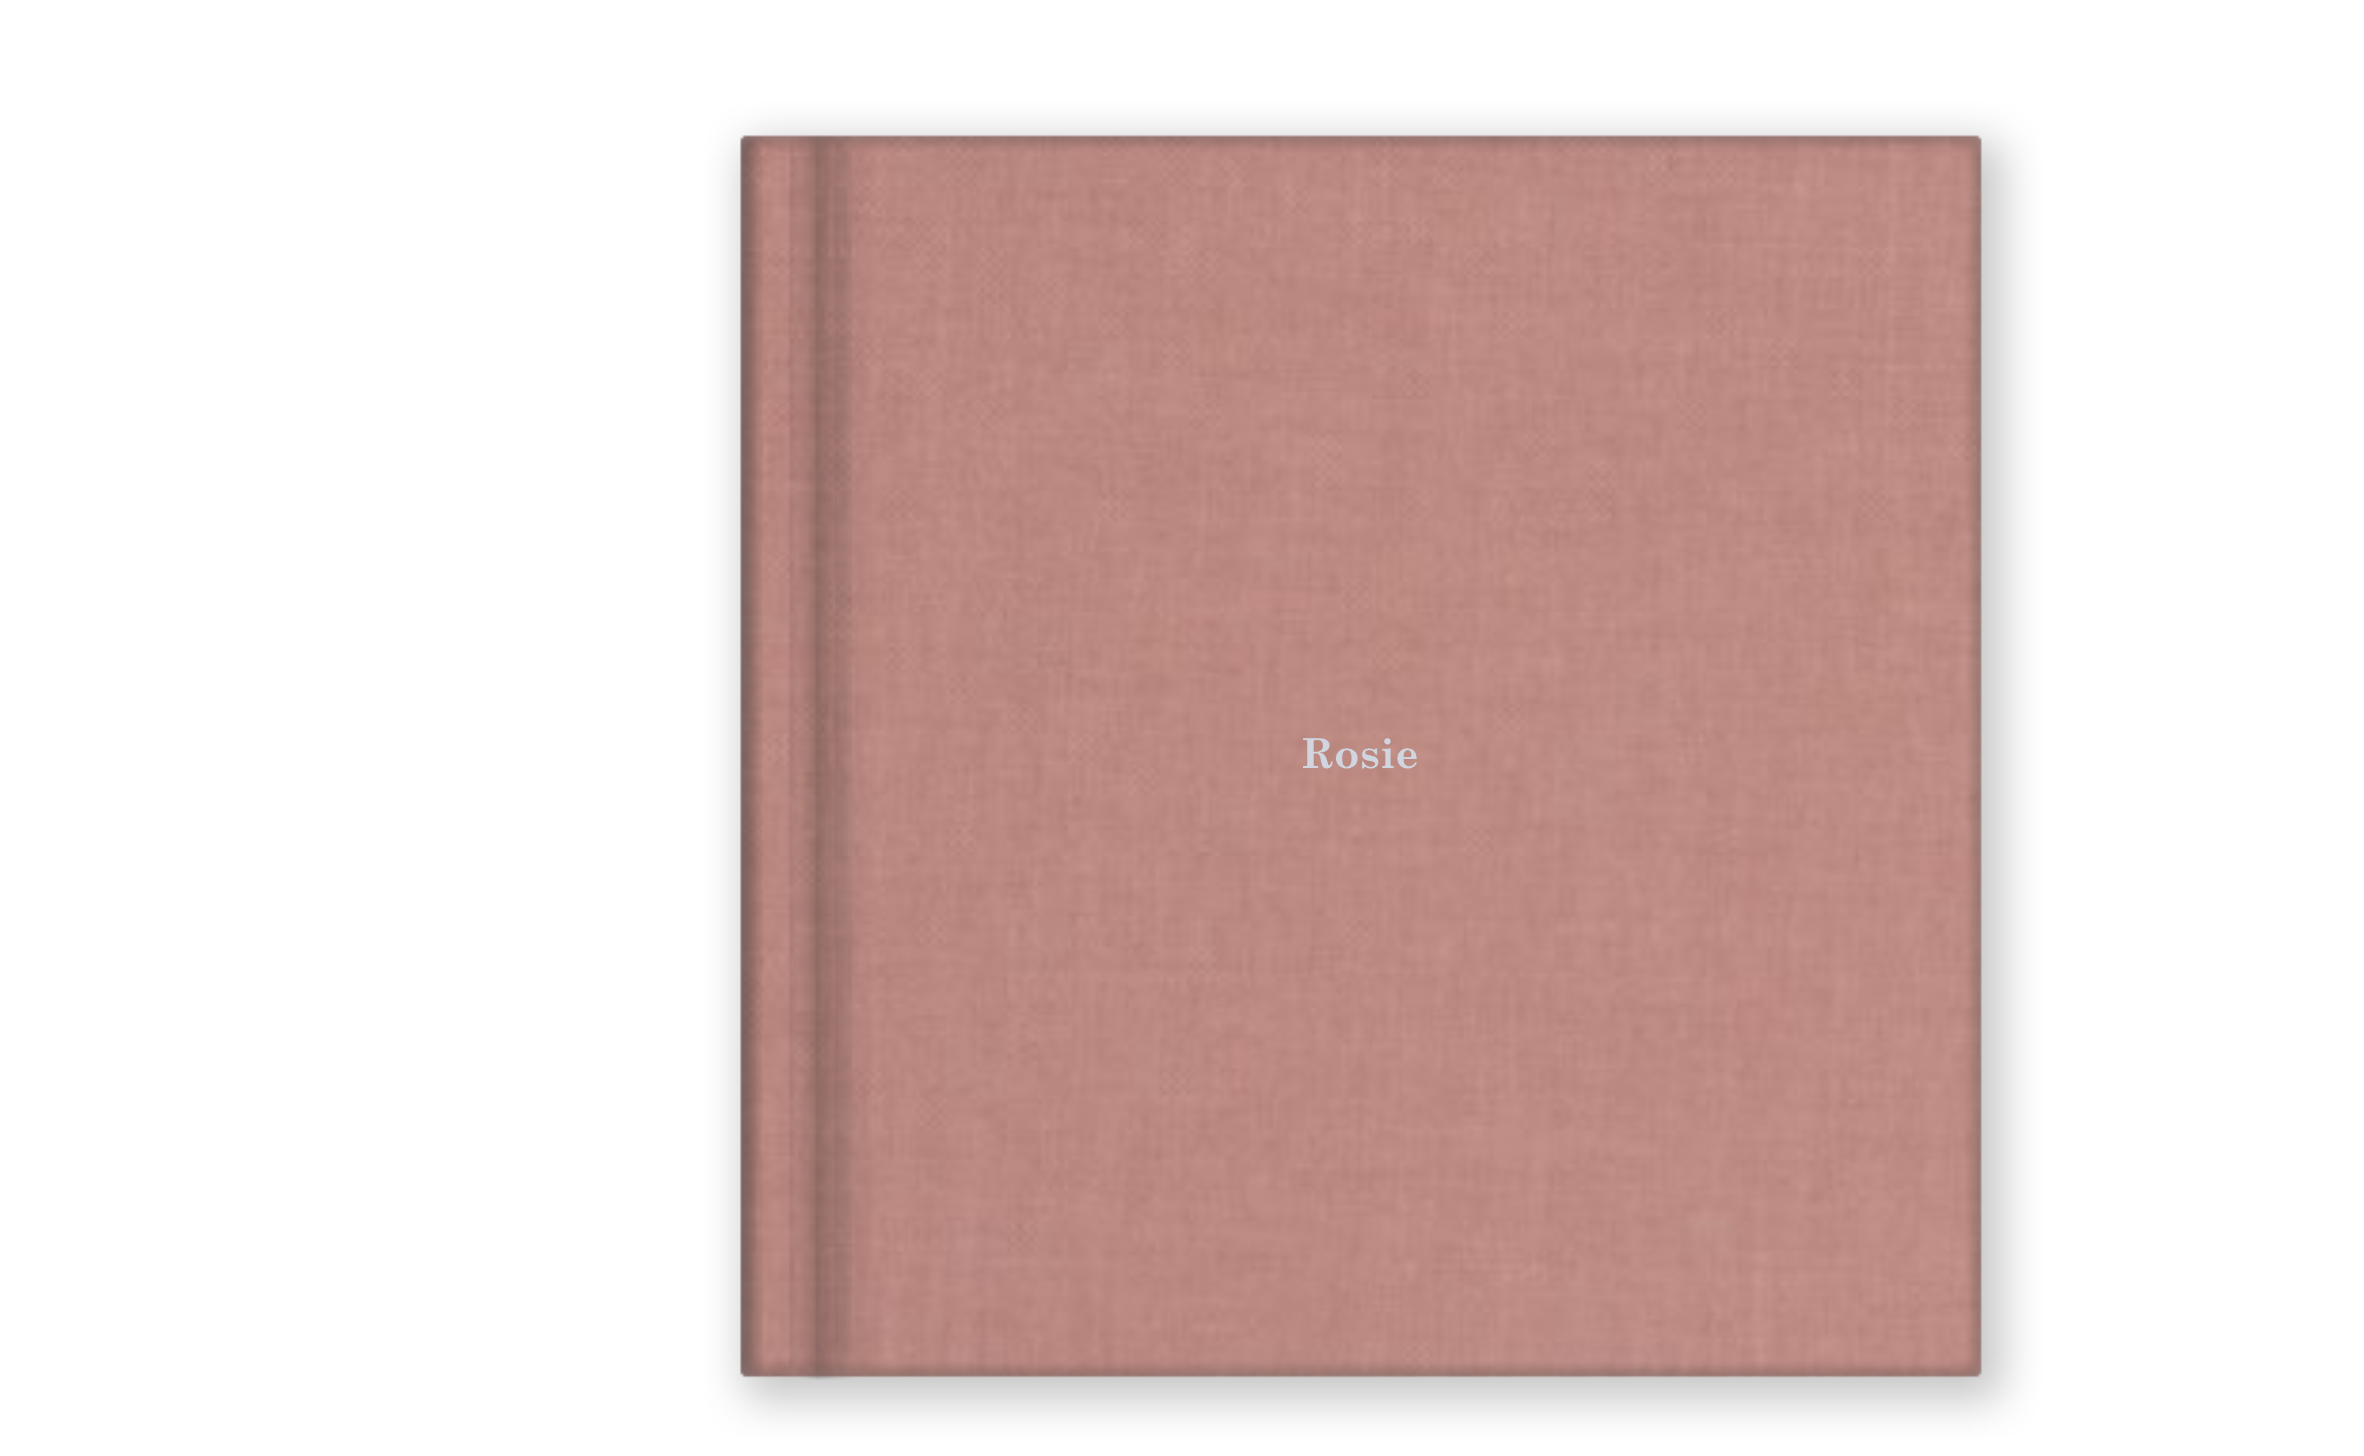 a photo album is displayed that is a light pink with the name "rosie"